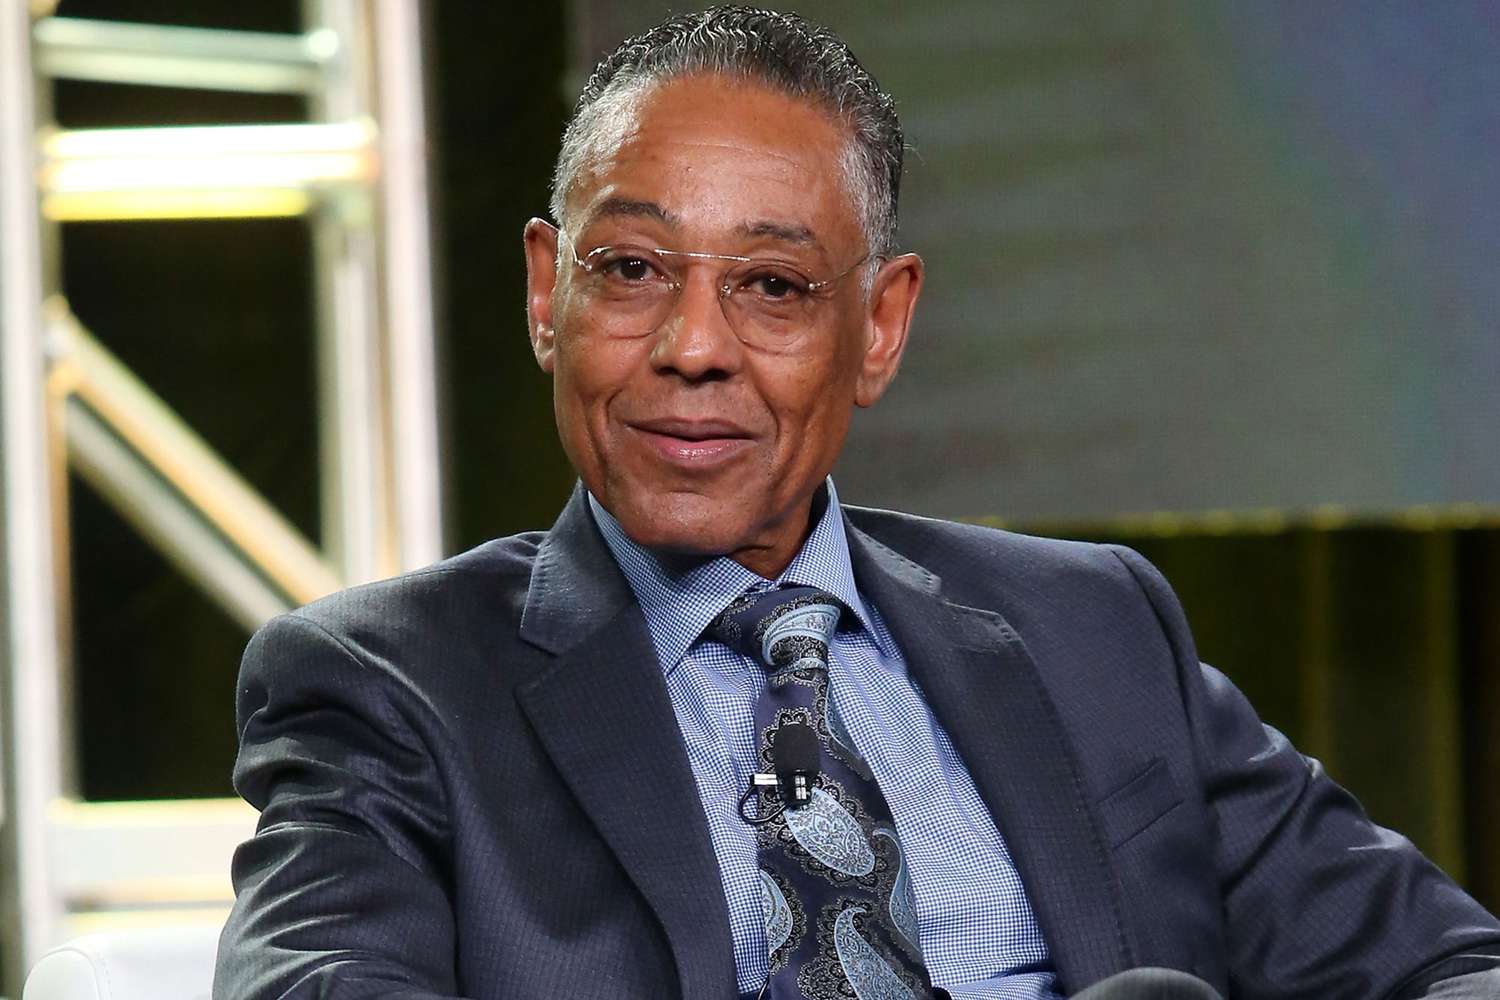 Giancarlo Esposito Teases Massive Plan For His Mcu Character